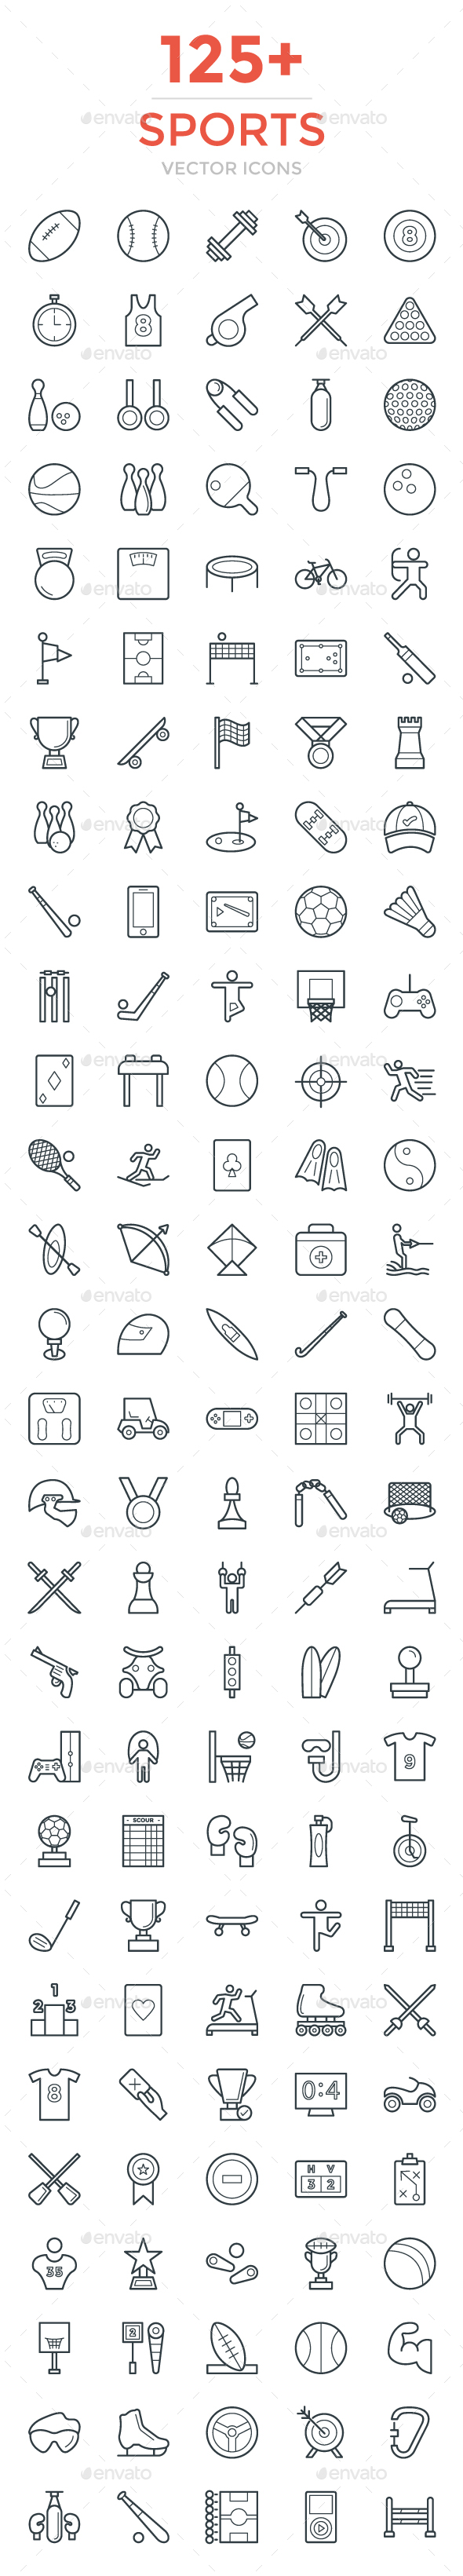 125+ Sports Vector Icons